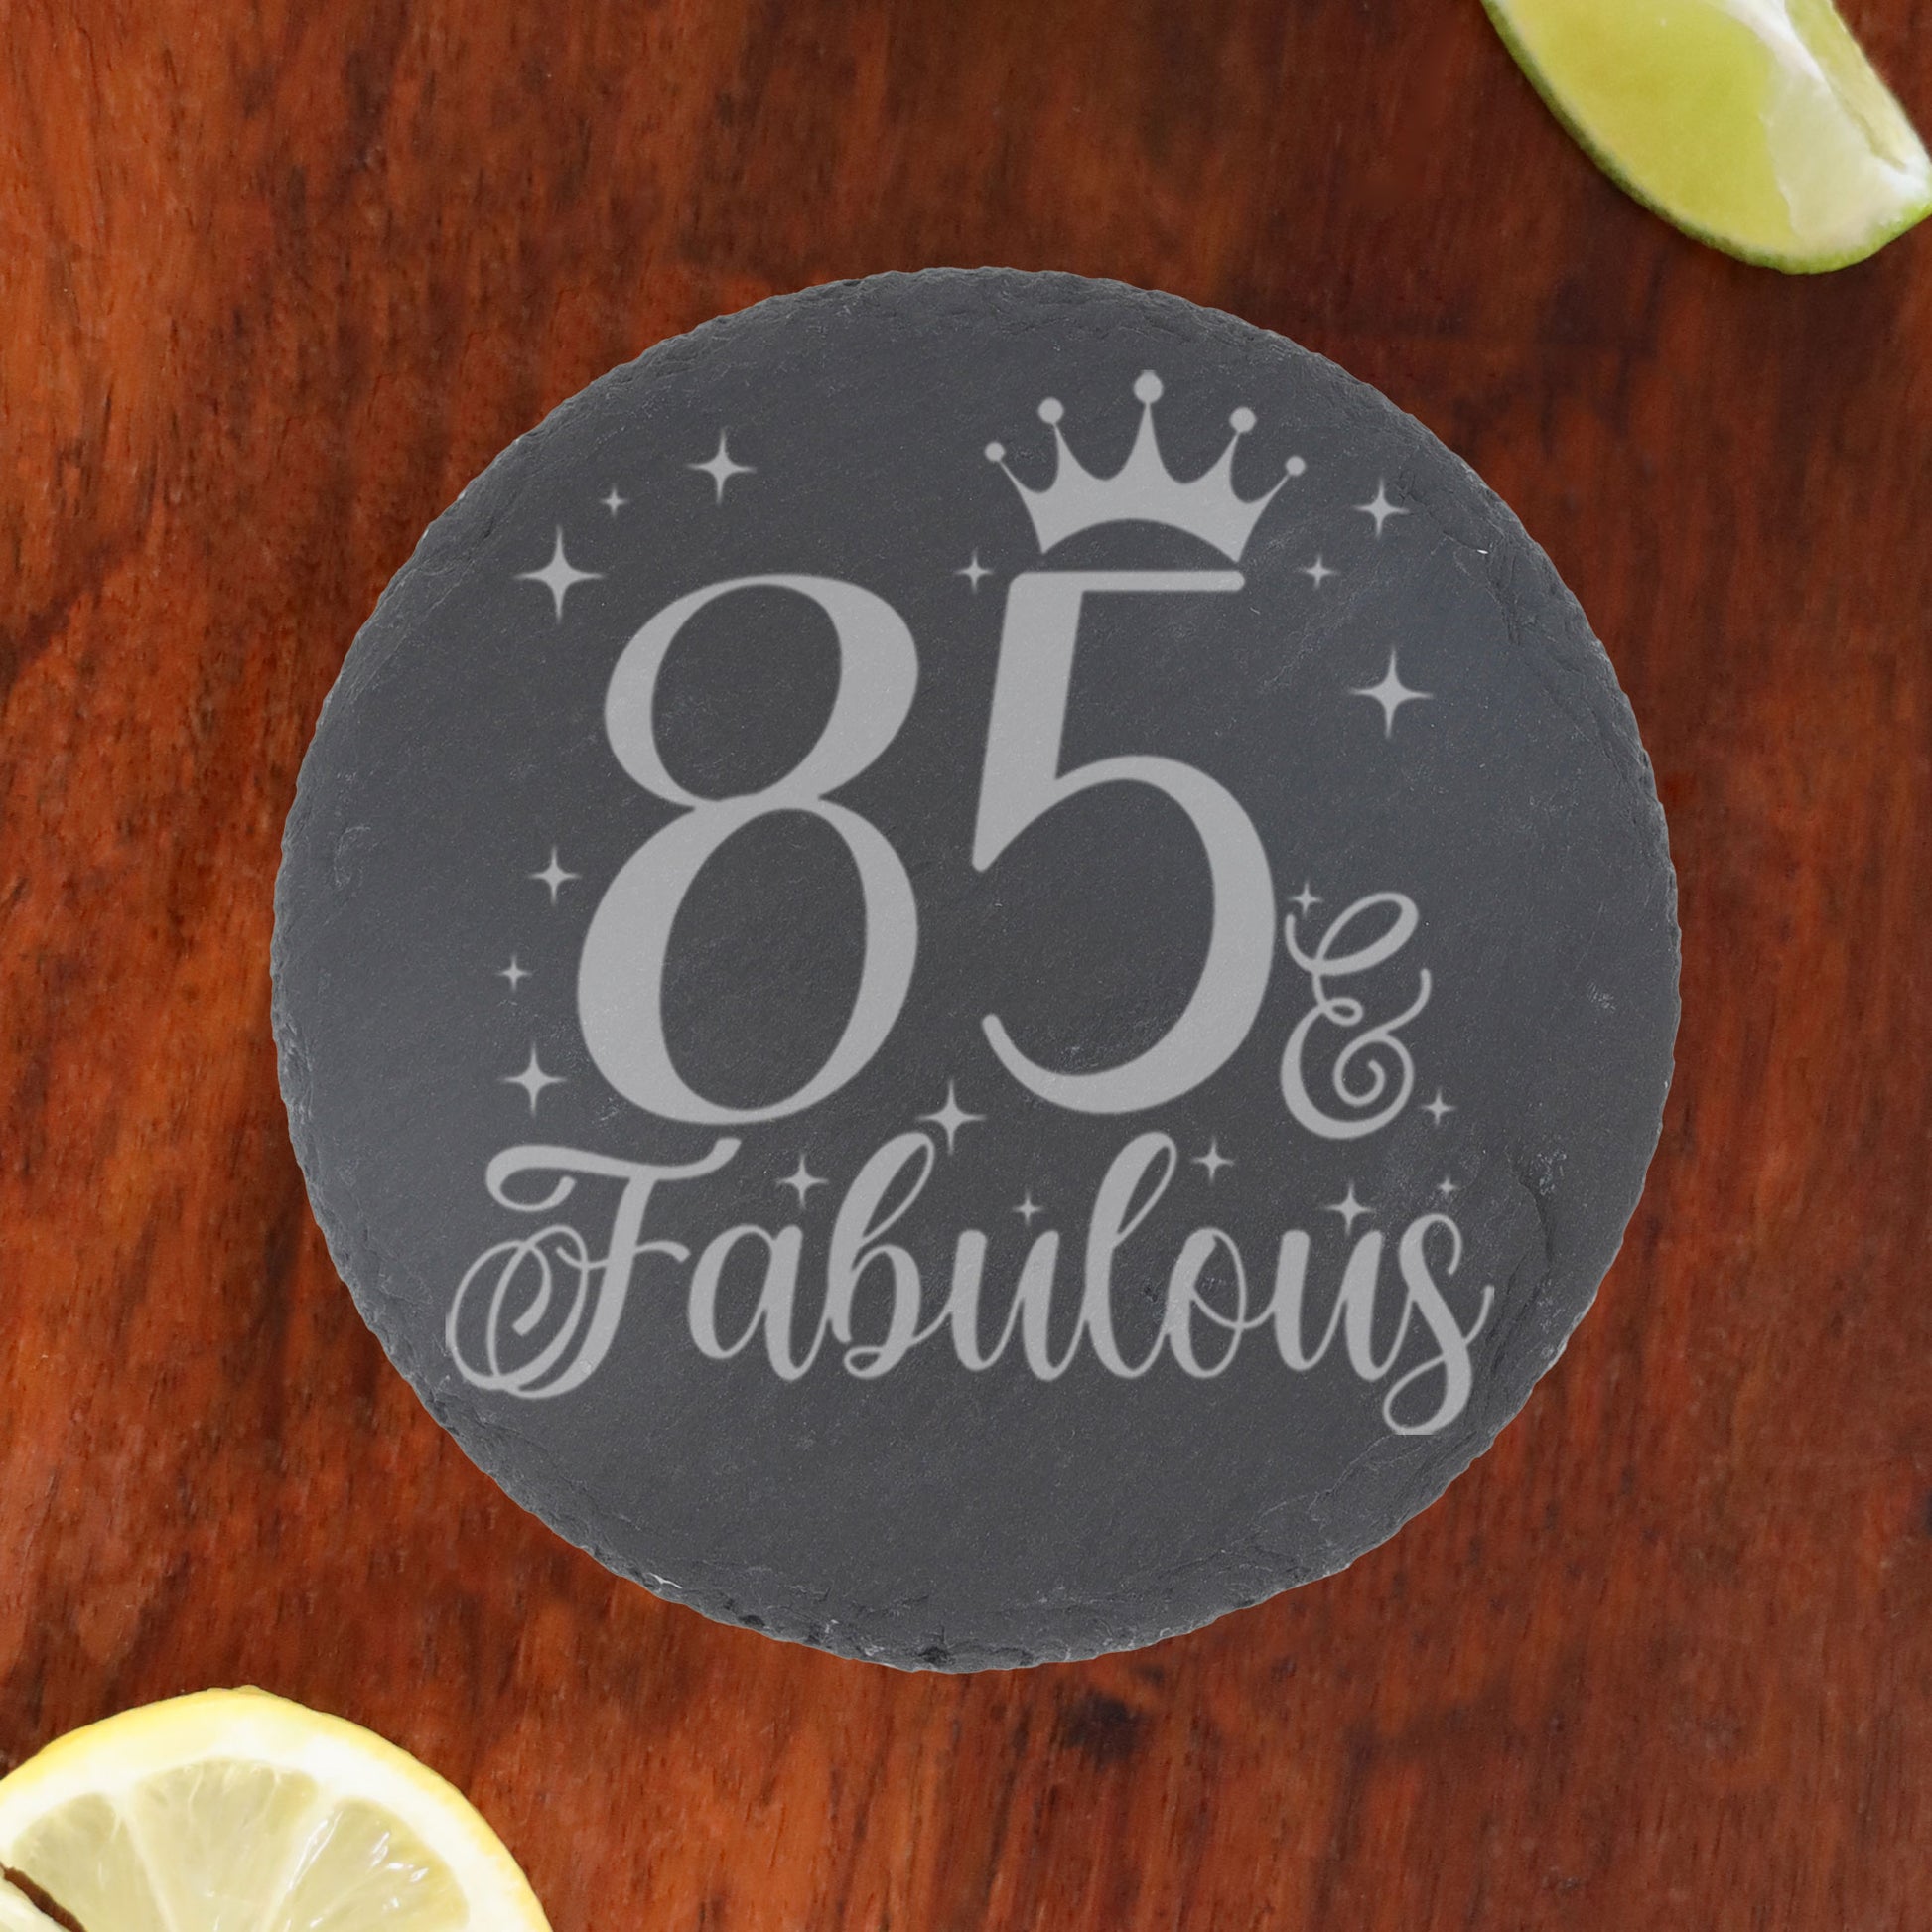 85 & Fabulous 85th Birthday Gift Engraved Wine Glass and/or Coaster Set  - Always Looking Good - Round Coaster Only  